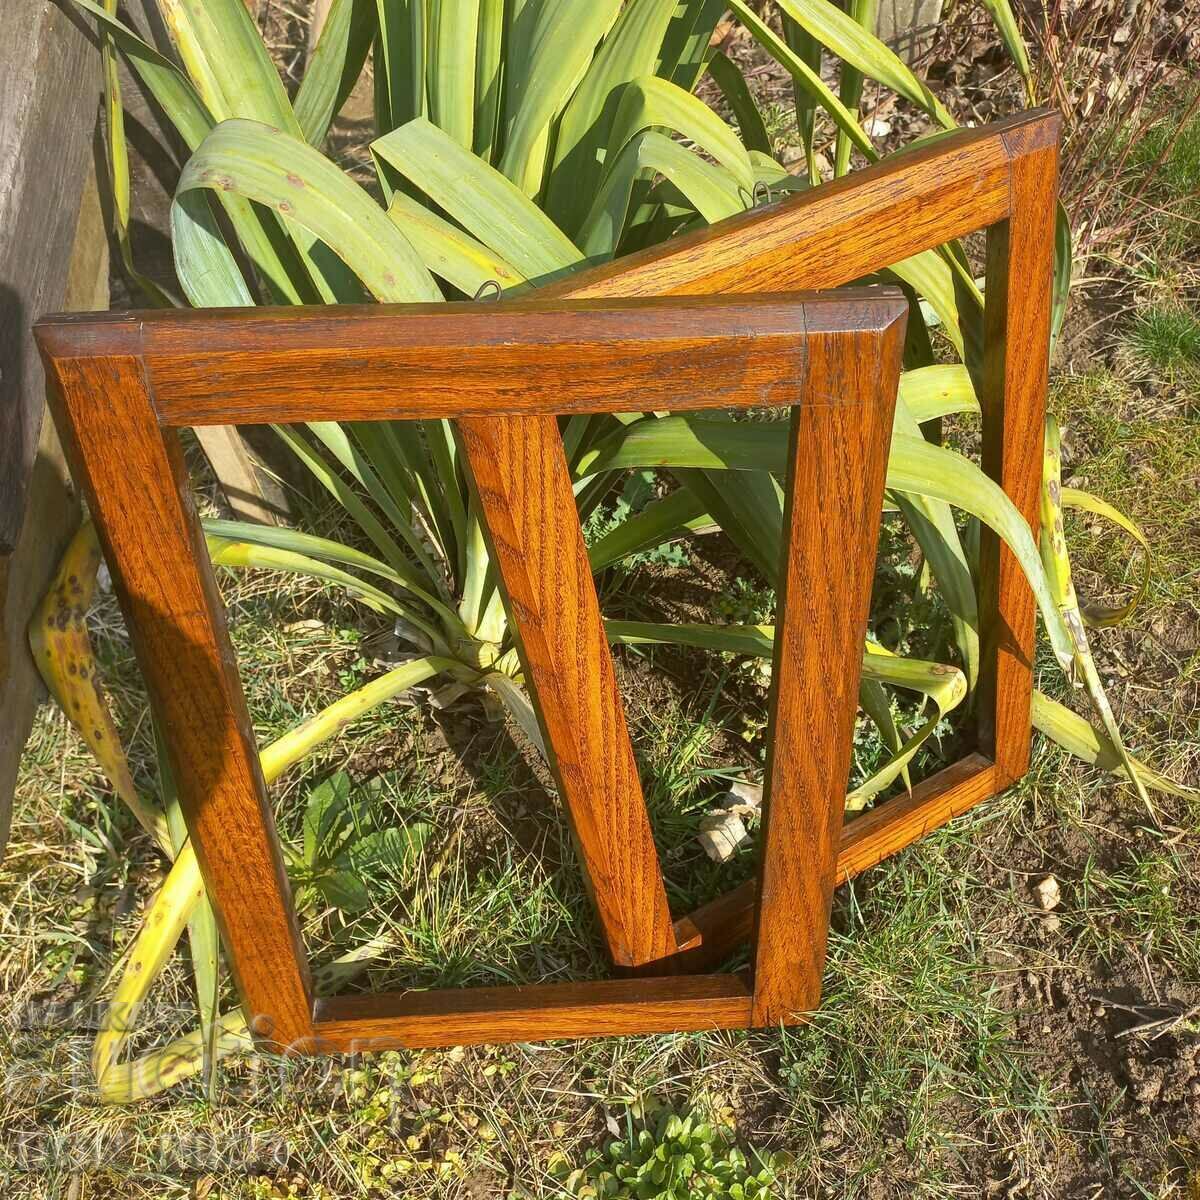 Frames for Mirrors or pictures-Cherry